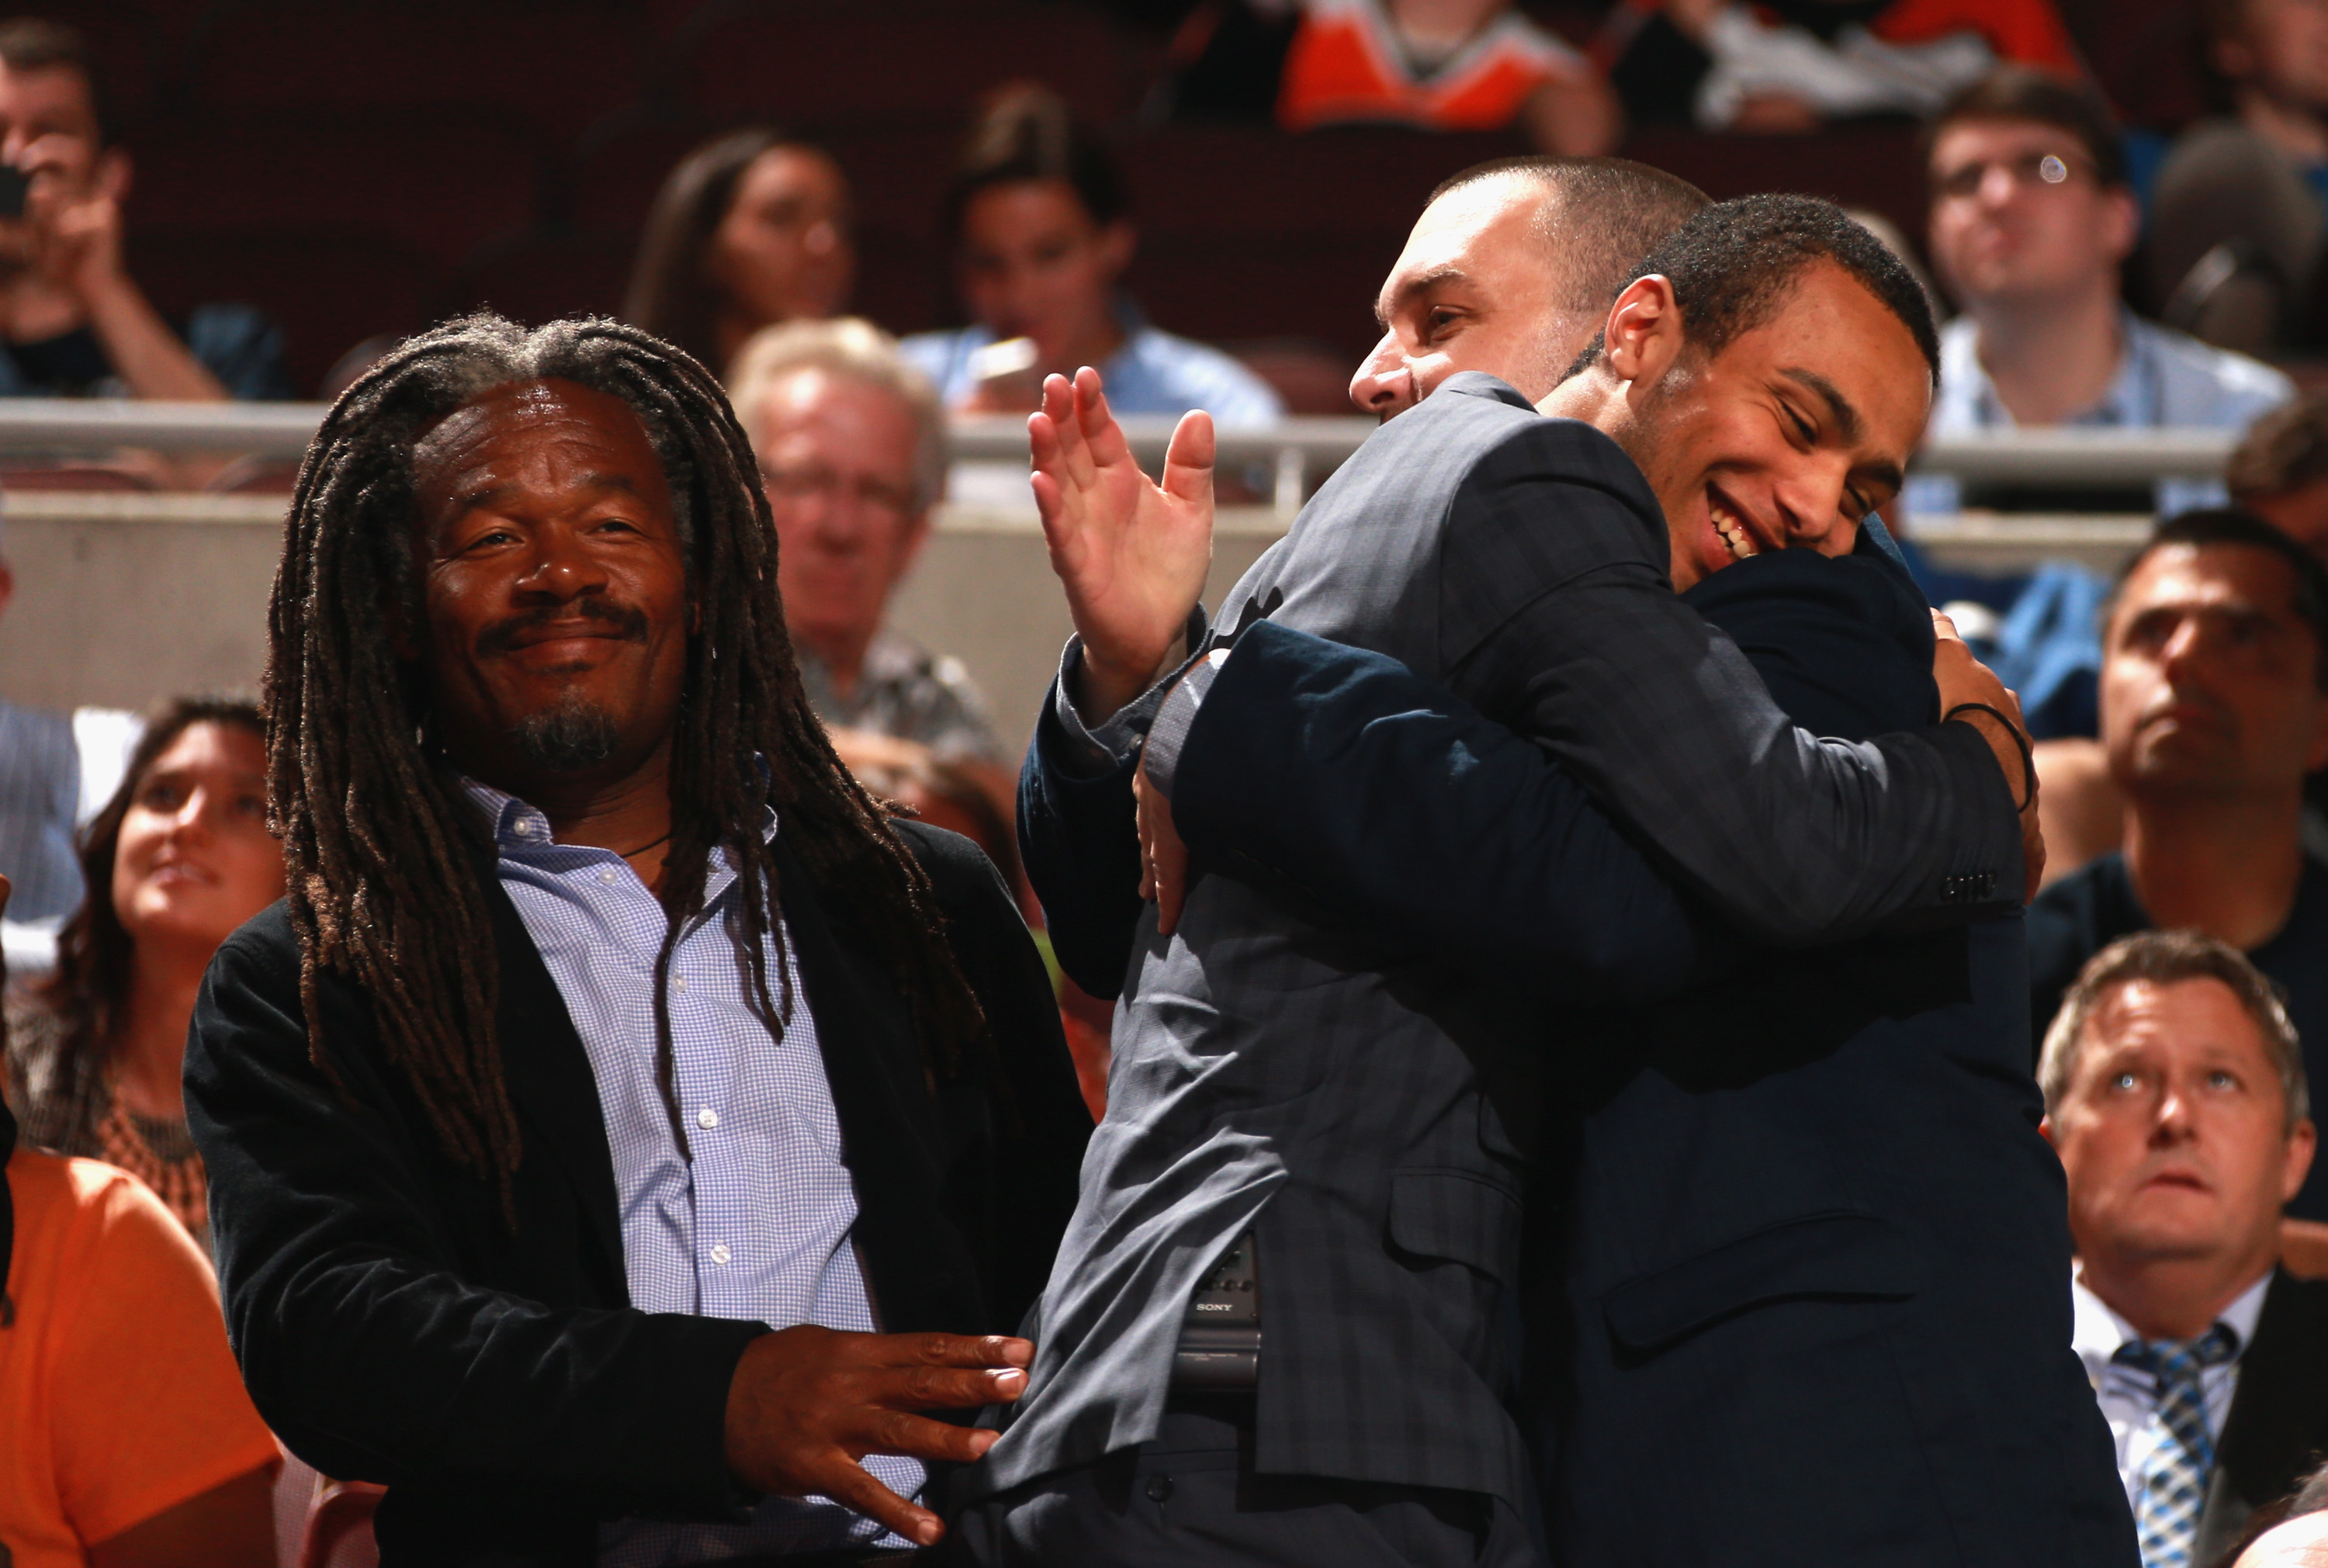 PHILADELPHIA, PA - JUNE 27: Josh Ho-Sang celebrates with his dad (L) and a family friend after being selected 28th overall by the New York Islanders during the 2014 NHL Entry Draft at Wells Fargo Center on June 27, 2014 in Philadelphia, Pennsylvania. (Photo by Dave Sandford/NHLI via Getty Images)